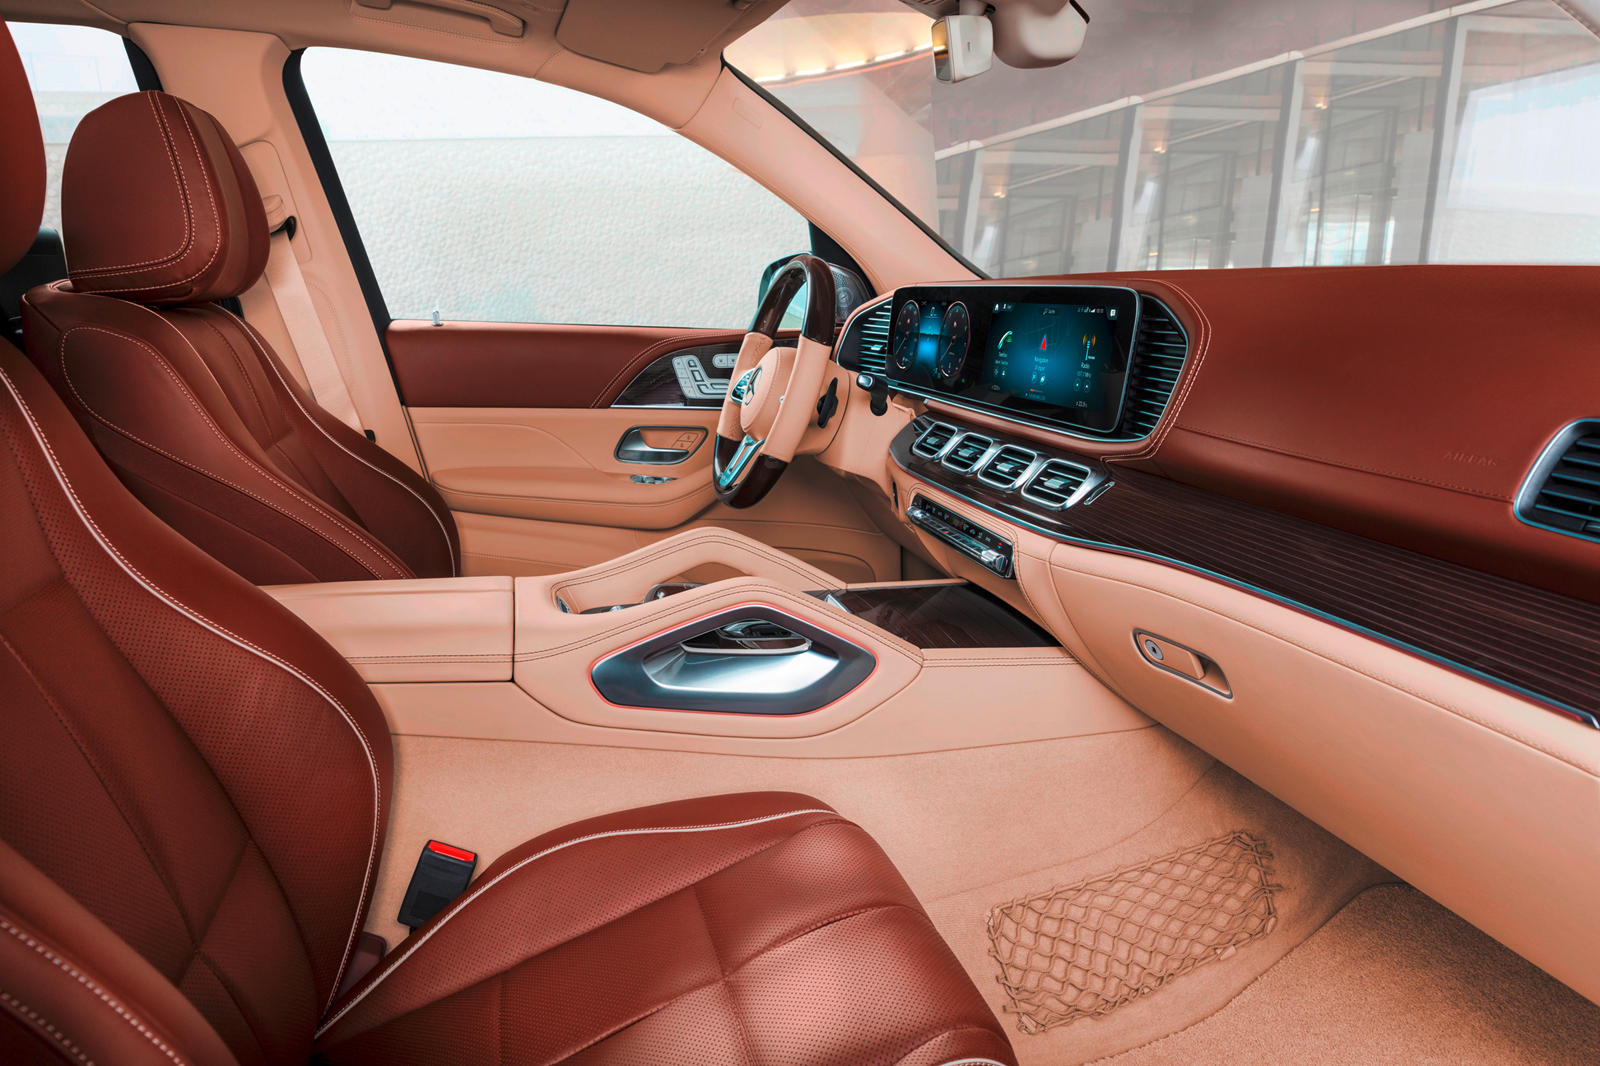 2023 Mercedes-Maybach S Interior Dimensions: Seating, Cargo Space